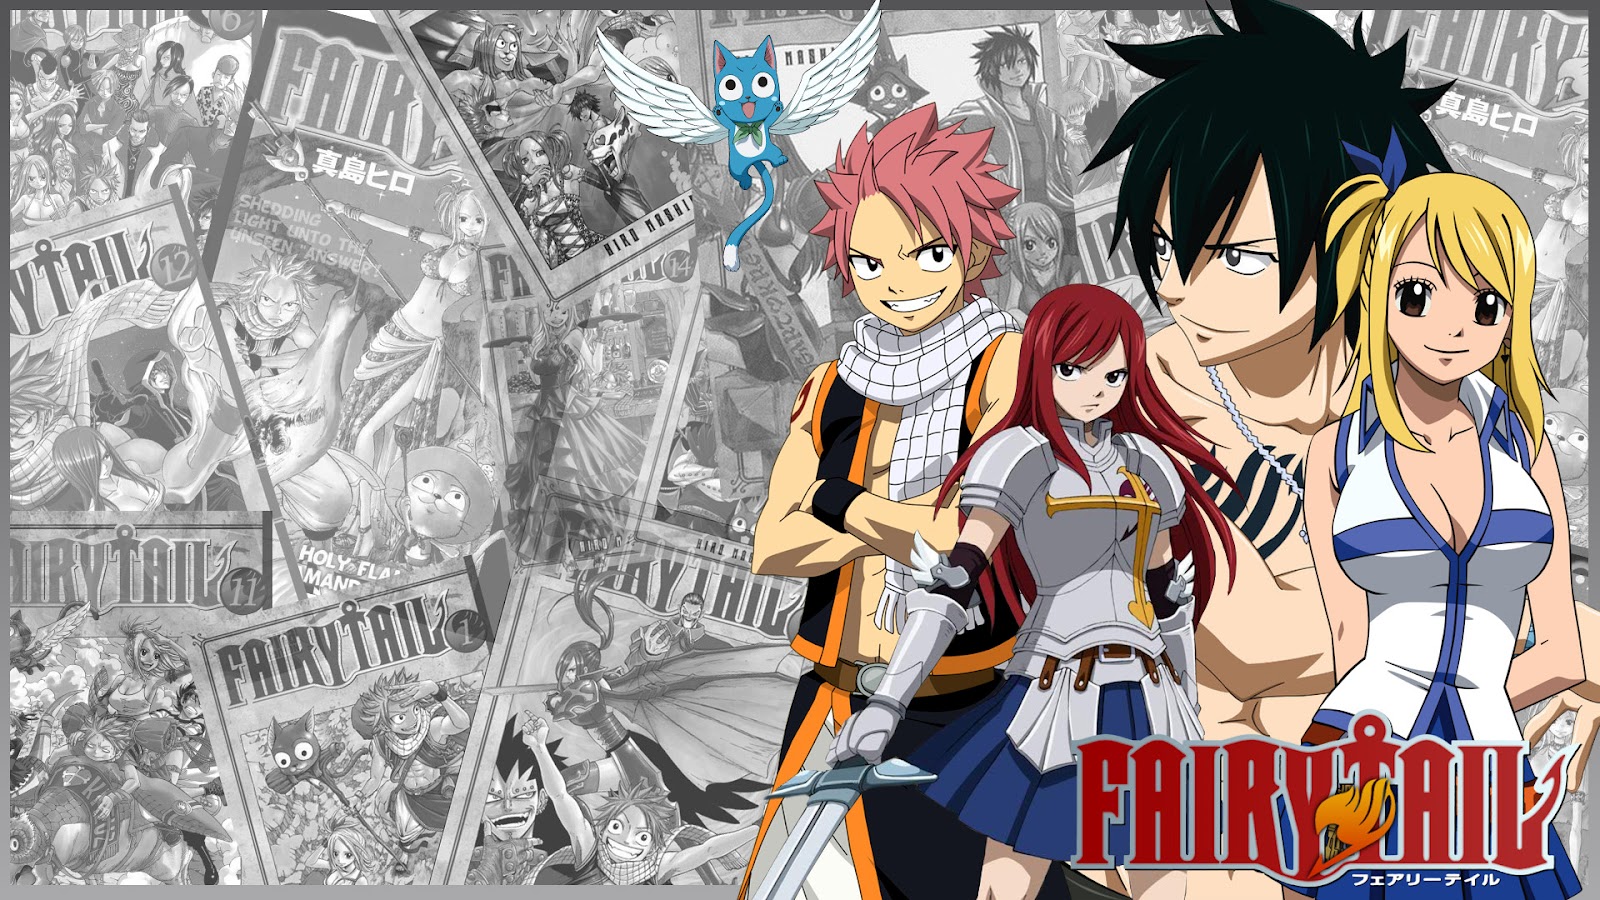 Free Download Fairy Tail Wallpaper 2 Fairy Tail Wallpaper 3 Fairy Tail Wallpaper 4 1600x900 For Your Desktop Mobile Tablet Explore 50 Fairy Tail Wallpaper For Iphone Fairy Tail